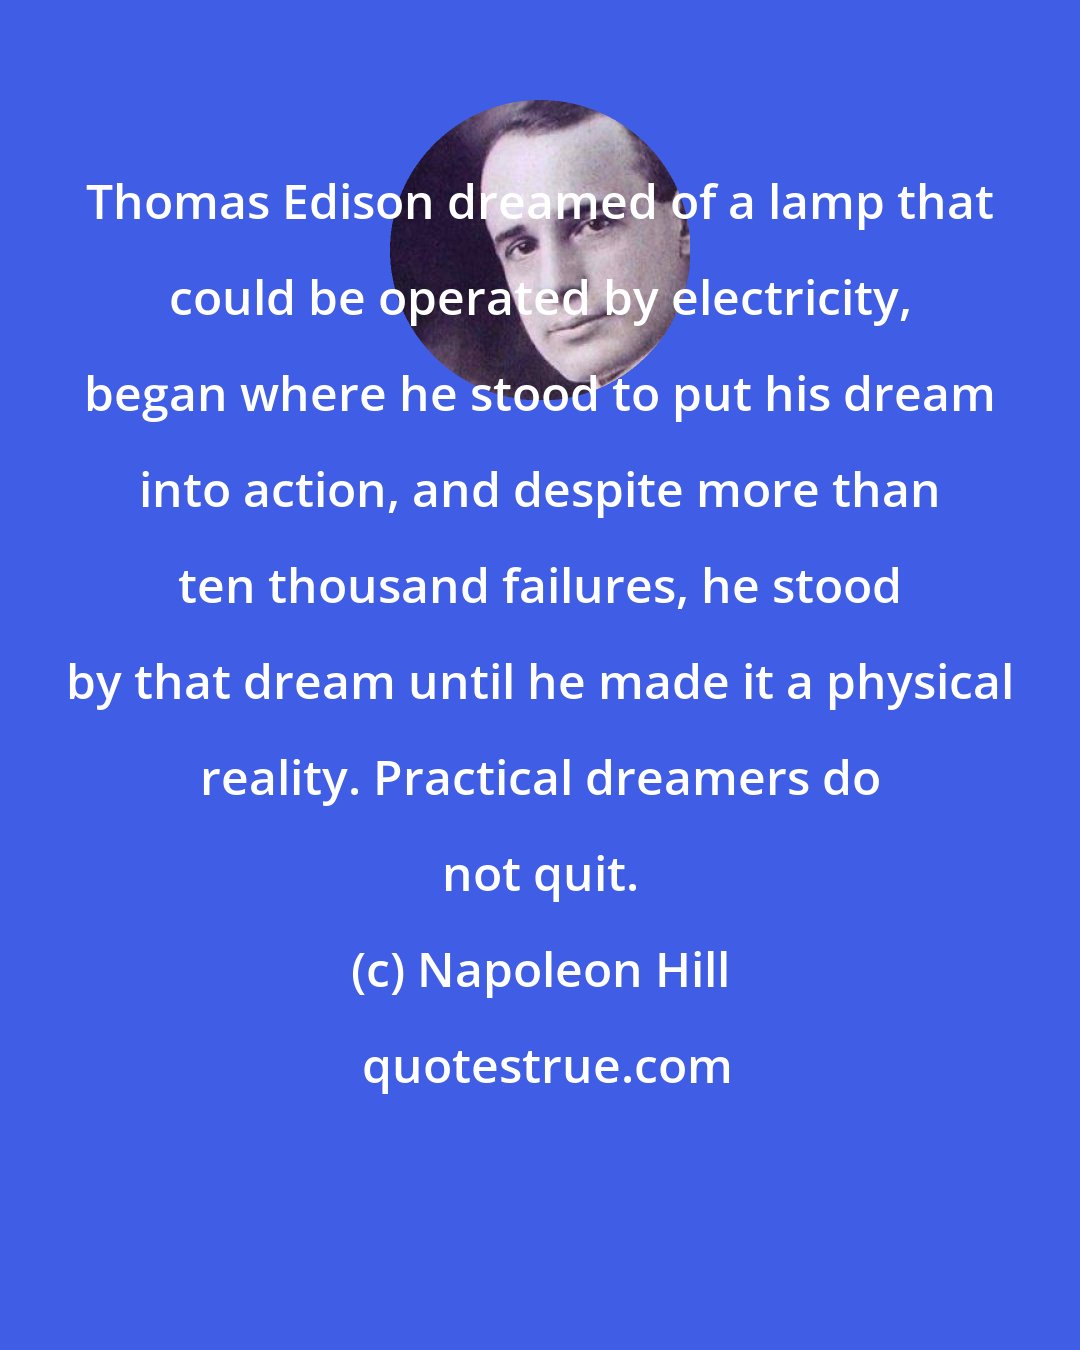 Napoleon Hill: Thomas Edison dreamed of a lamp that could be operated by electricity, began where he stood to put his dream into action, and despite more than ten thousand failures, he stood by that dream until he made it a physical reality. Practical dreamers do not quit.